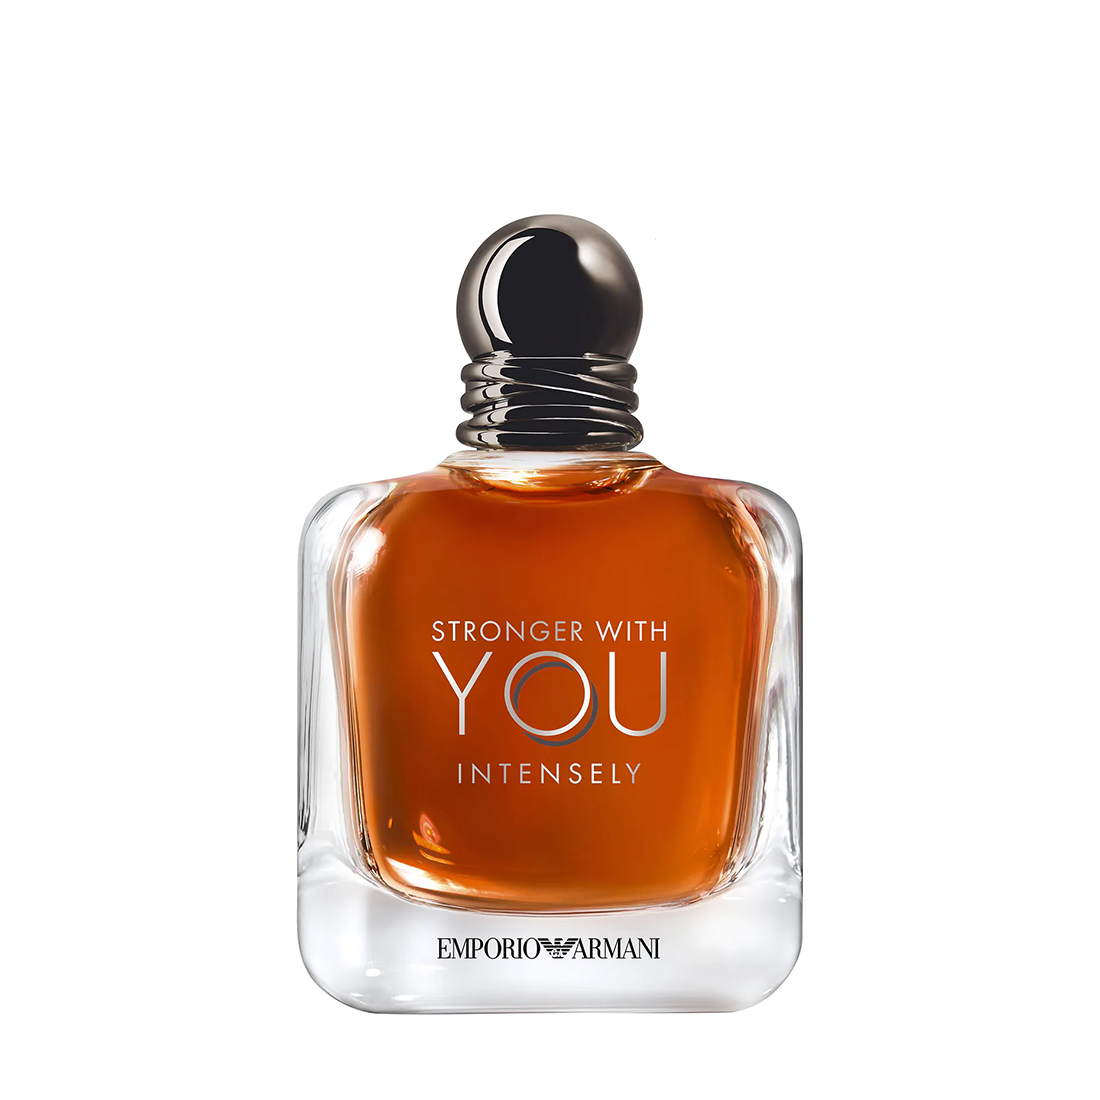 GIORGIO ARMANI STRONGER WITH YOU INTENSELY POUR HOMME